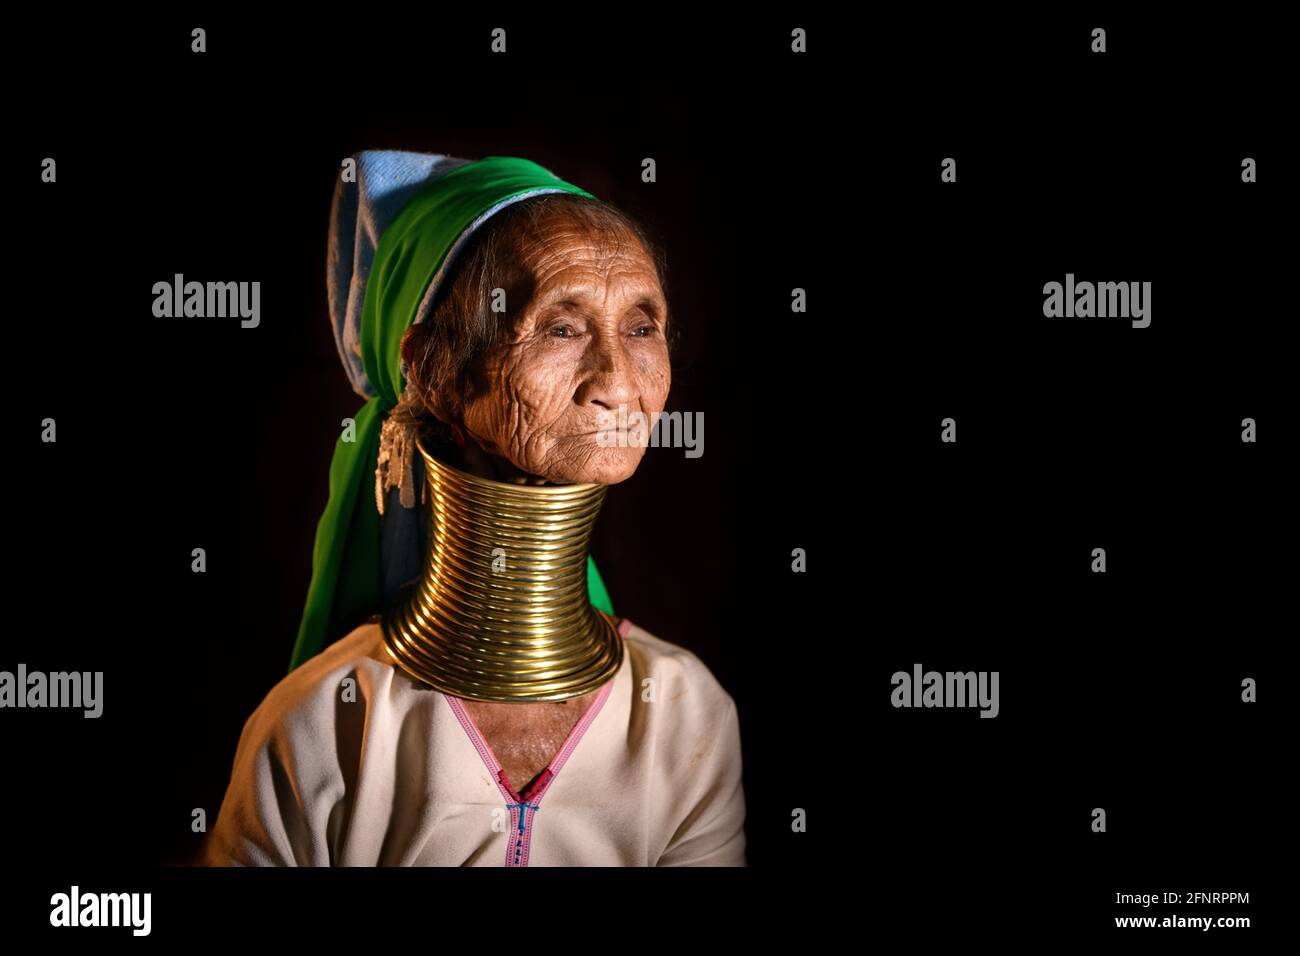 Long neck ladies of the Padaung or Kayan tribe.  Panpet village in the Loikaw region of Myanmar Stock Photo